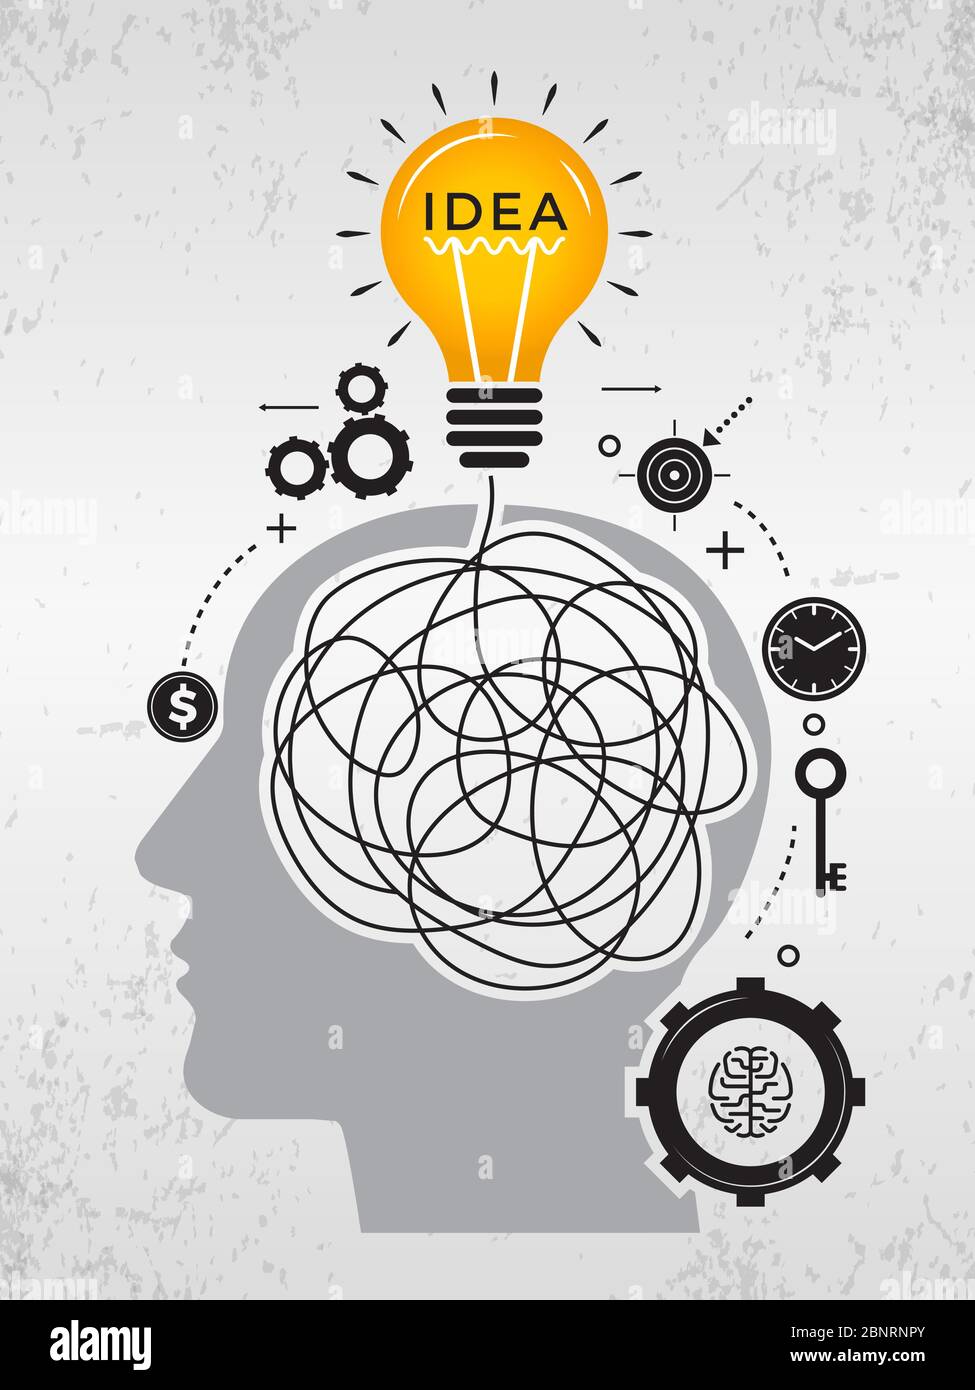 Idea search. Chaos lines of mind thinking about good idea scribble way vector shapes Stock Vector